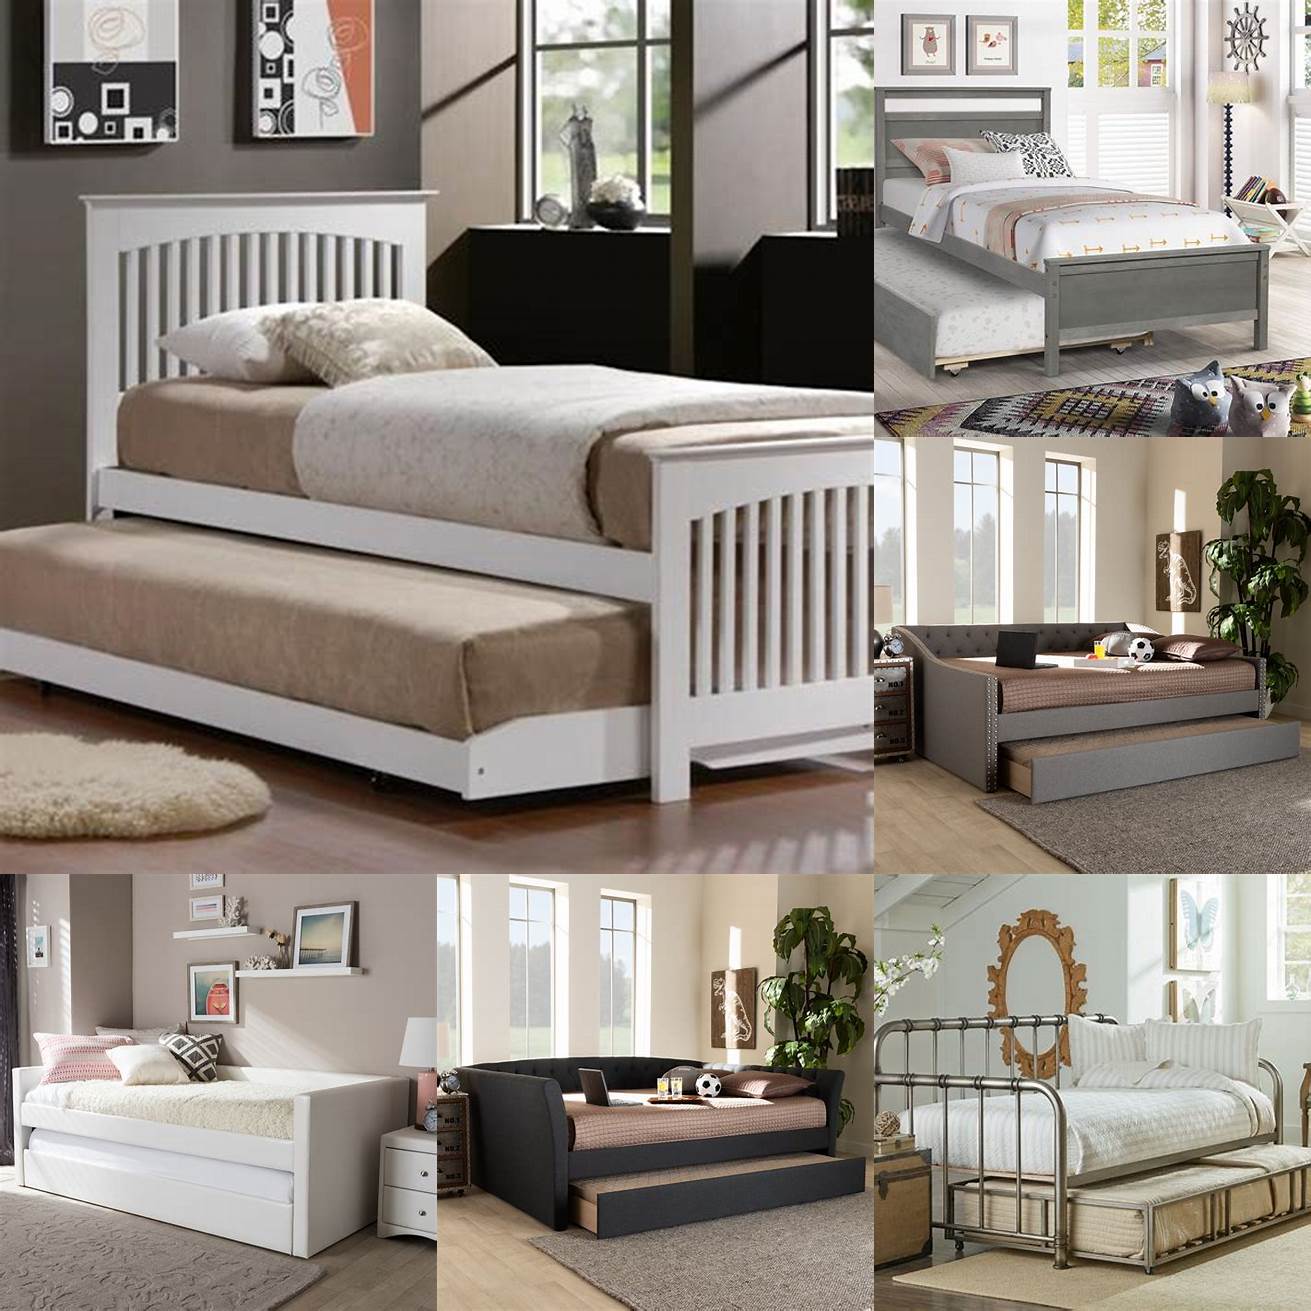 A trundle bed with matching bedding is perfect for a cohesive and stylish bedroom